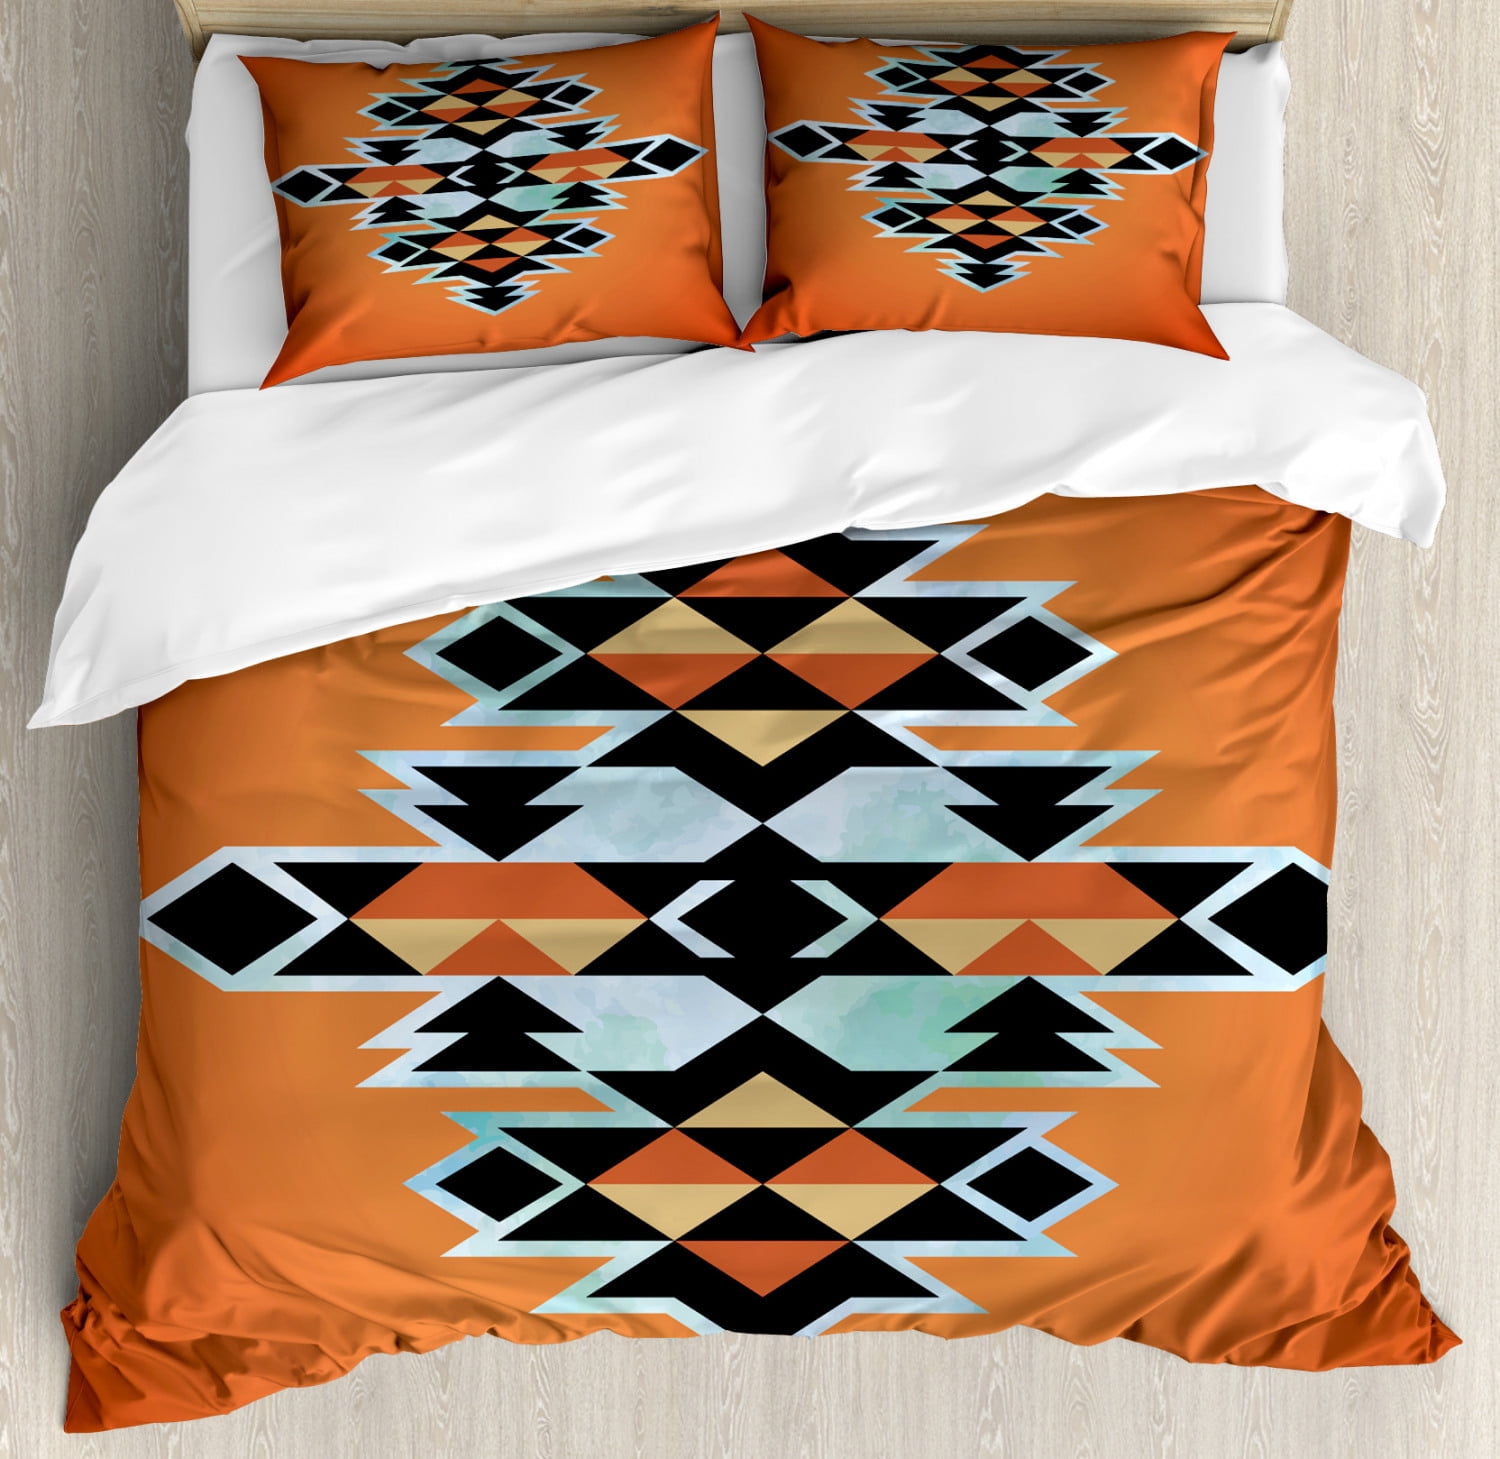 Tribal Duvet Cover Set Queen Size, Abstract Print Duvet Covers